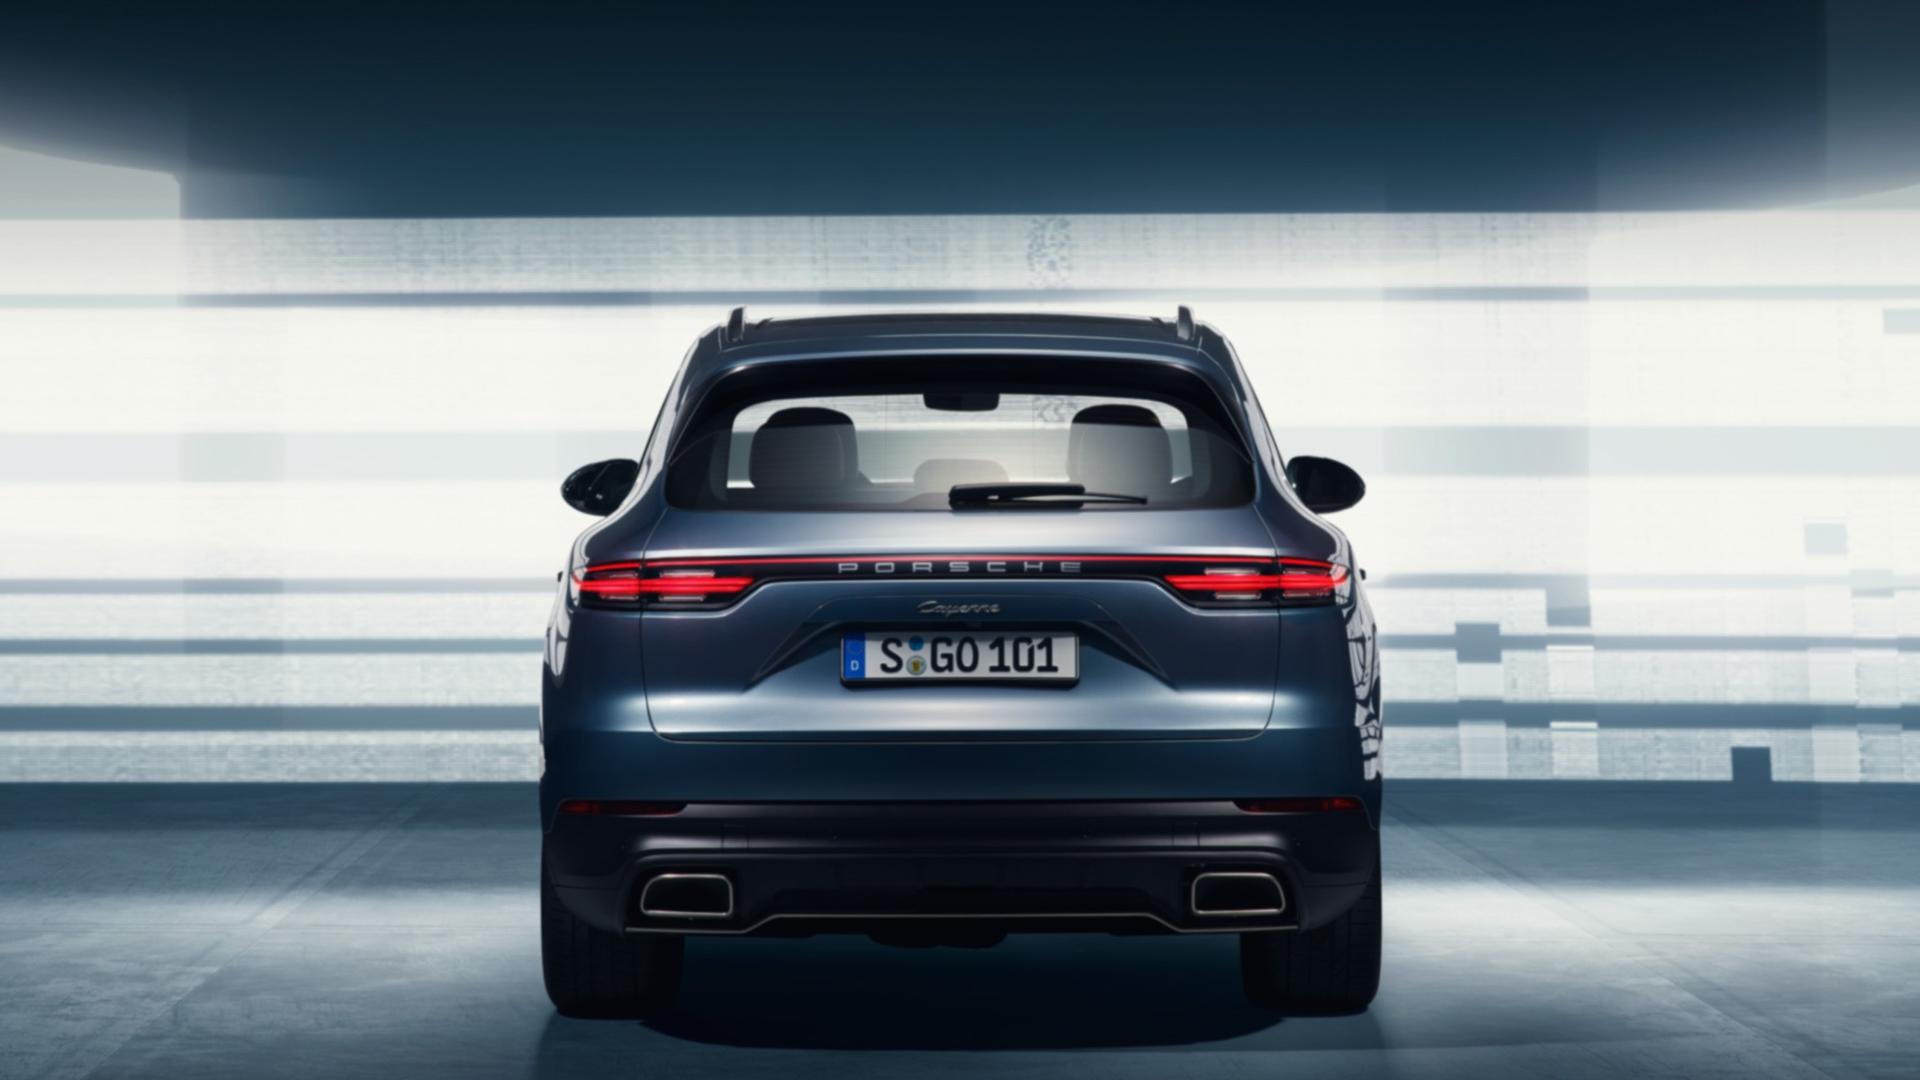 2018-porsche-cayenne-leaked-official-image_4.jpg